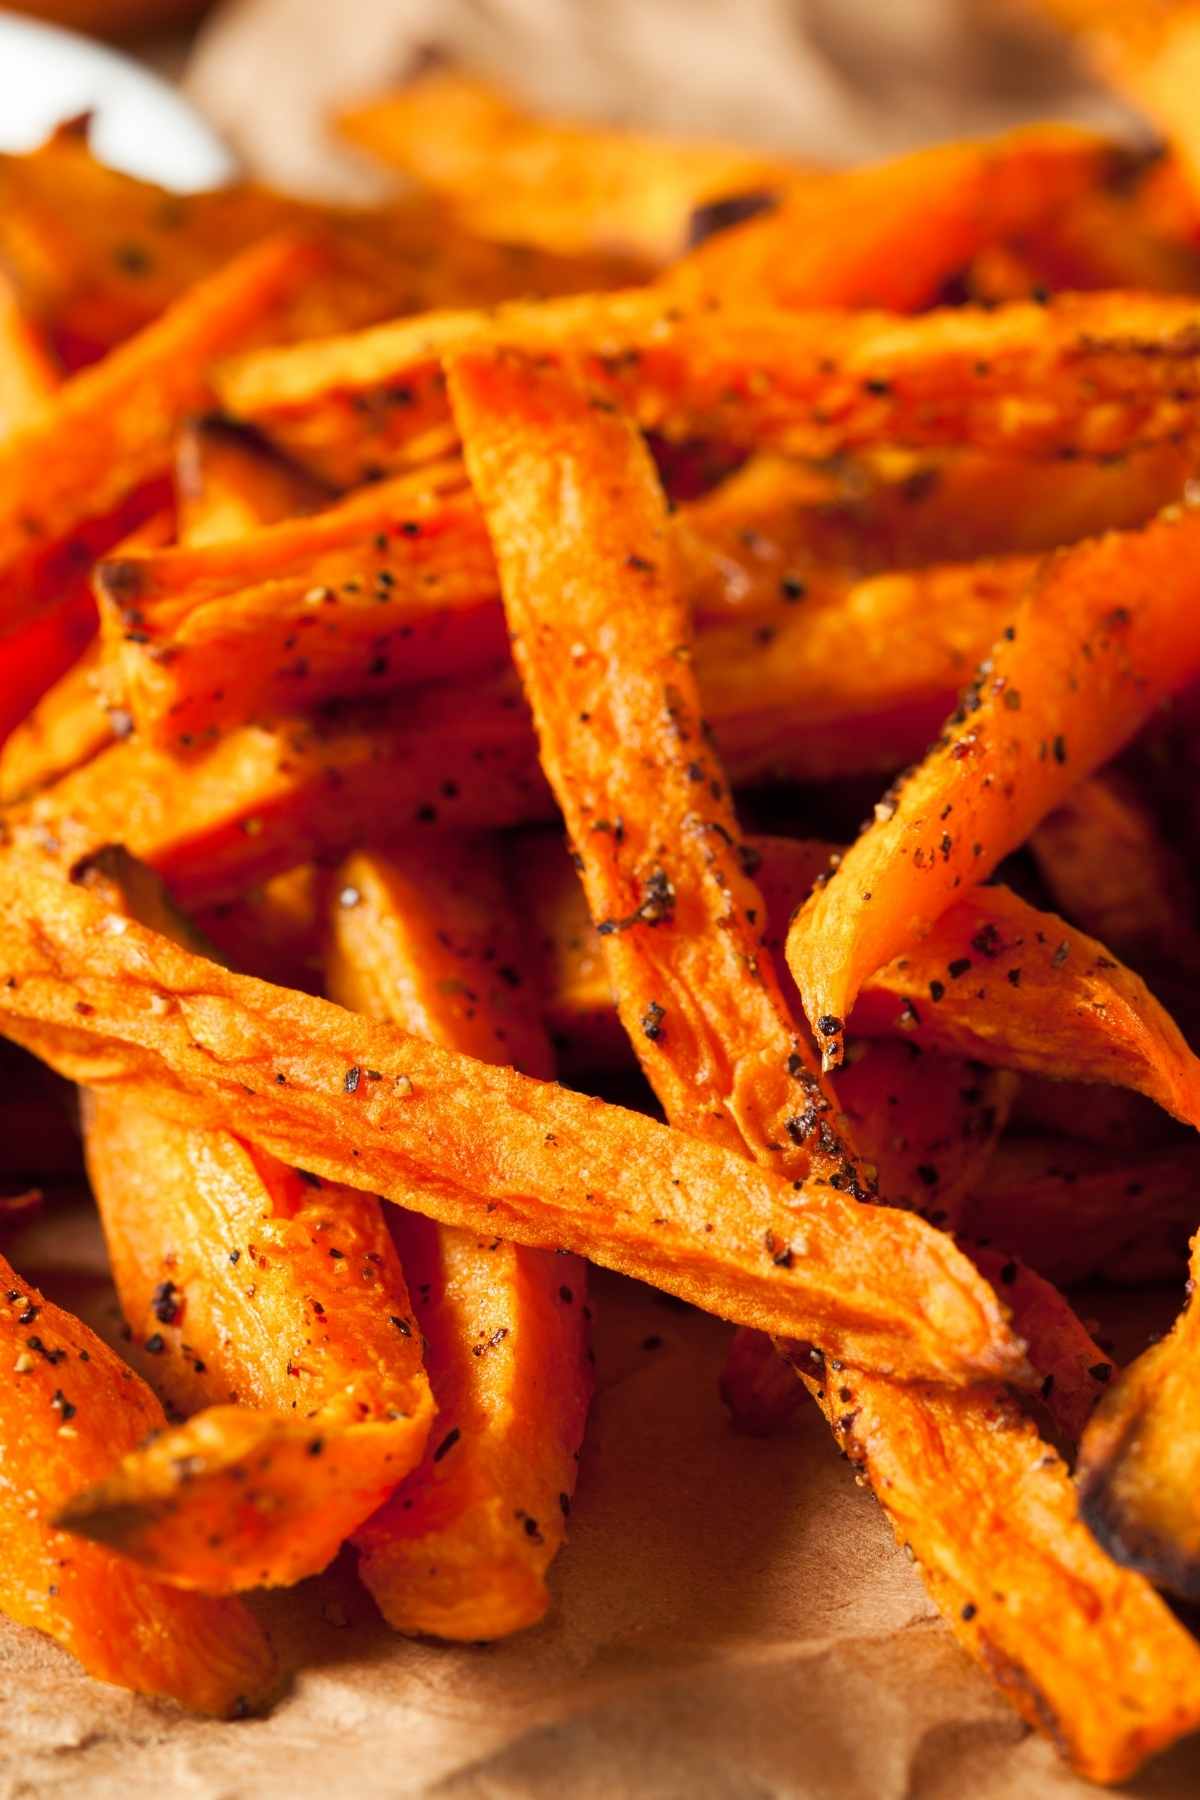 Looking for a healthier alternative to deep-fried French fries? Baked Sweet Potato Fries are just the thing. With a sweet and salty flavor, these crispy easy-to-make fries will be a new family favorite.